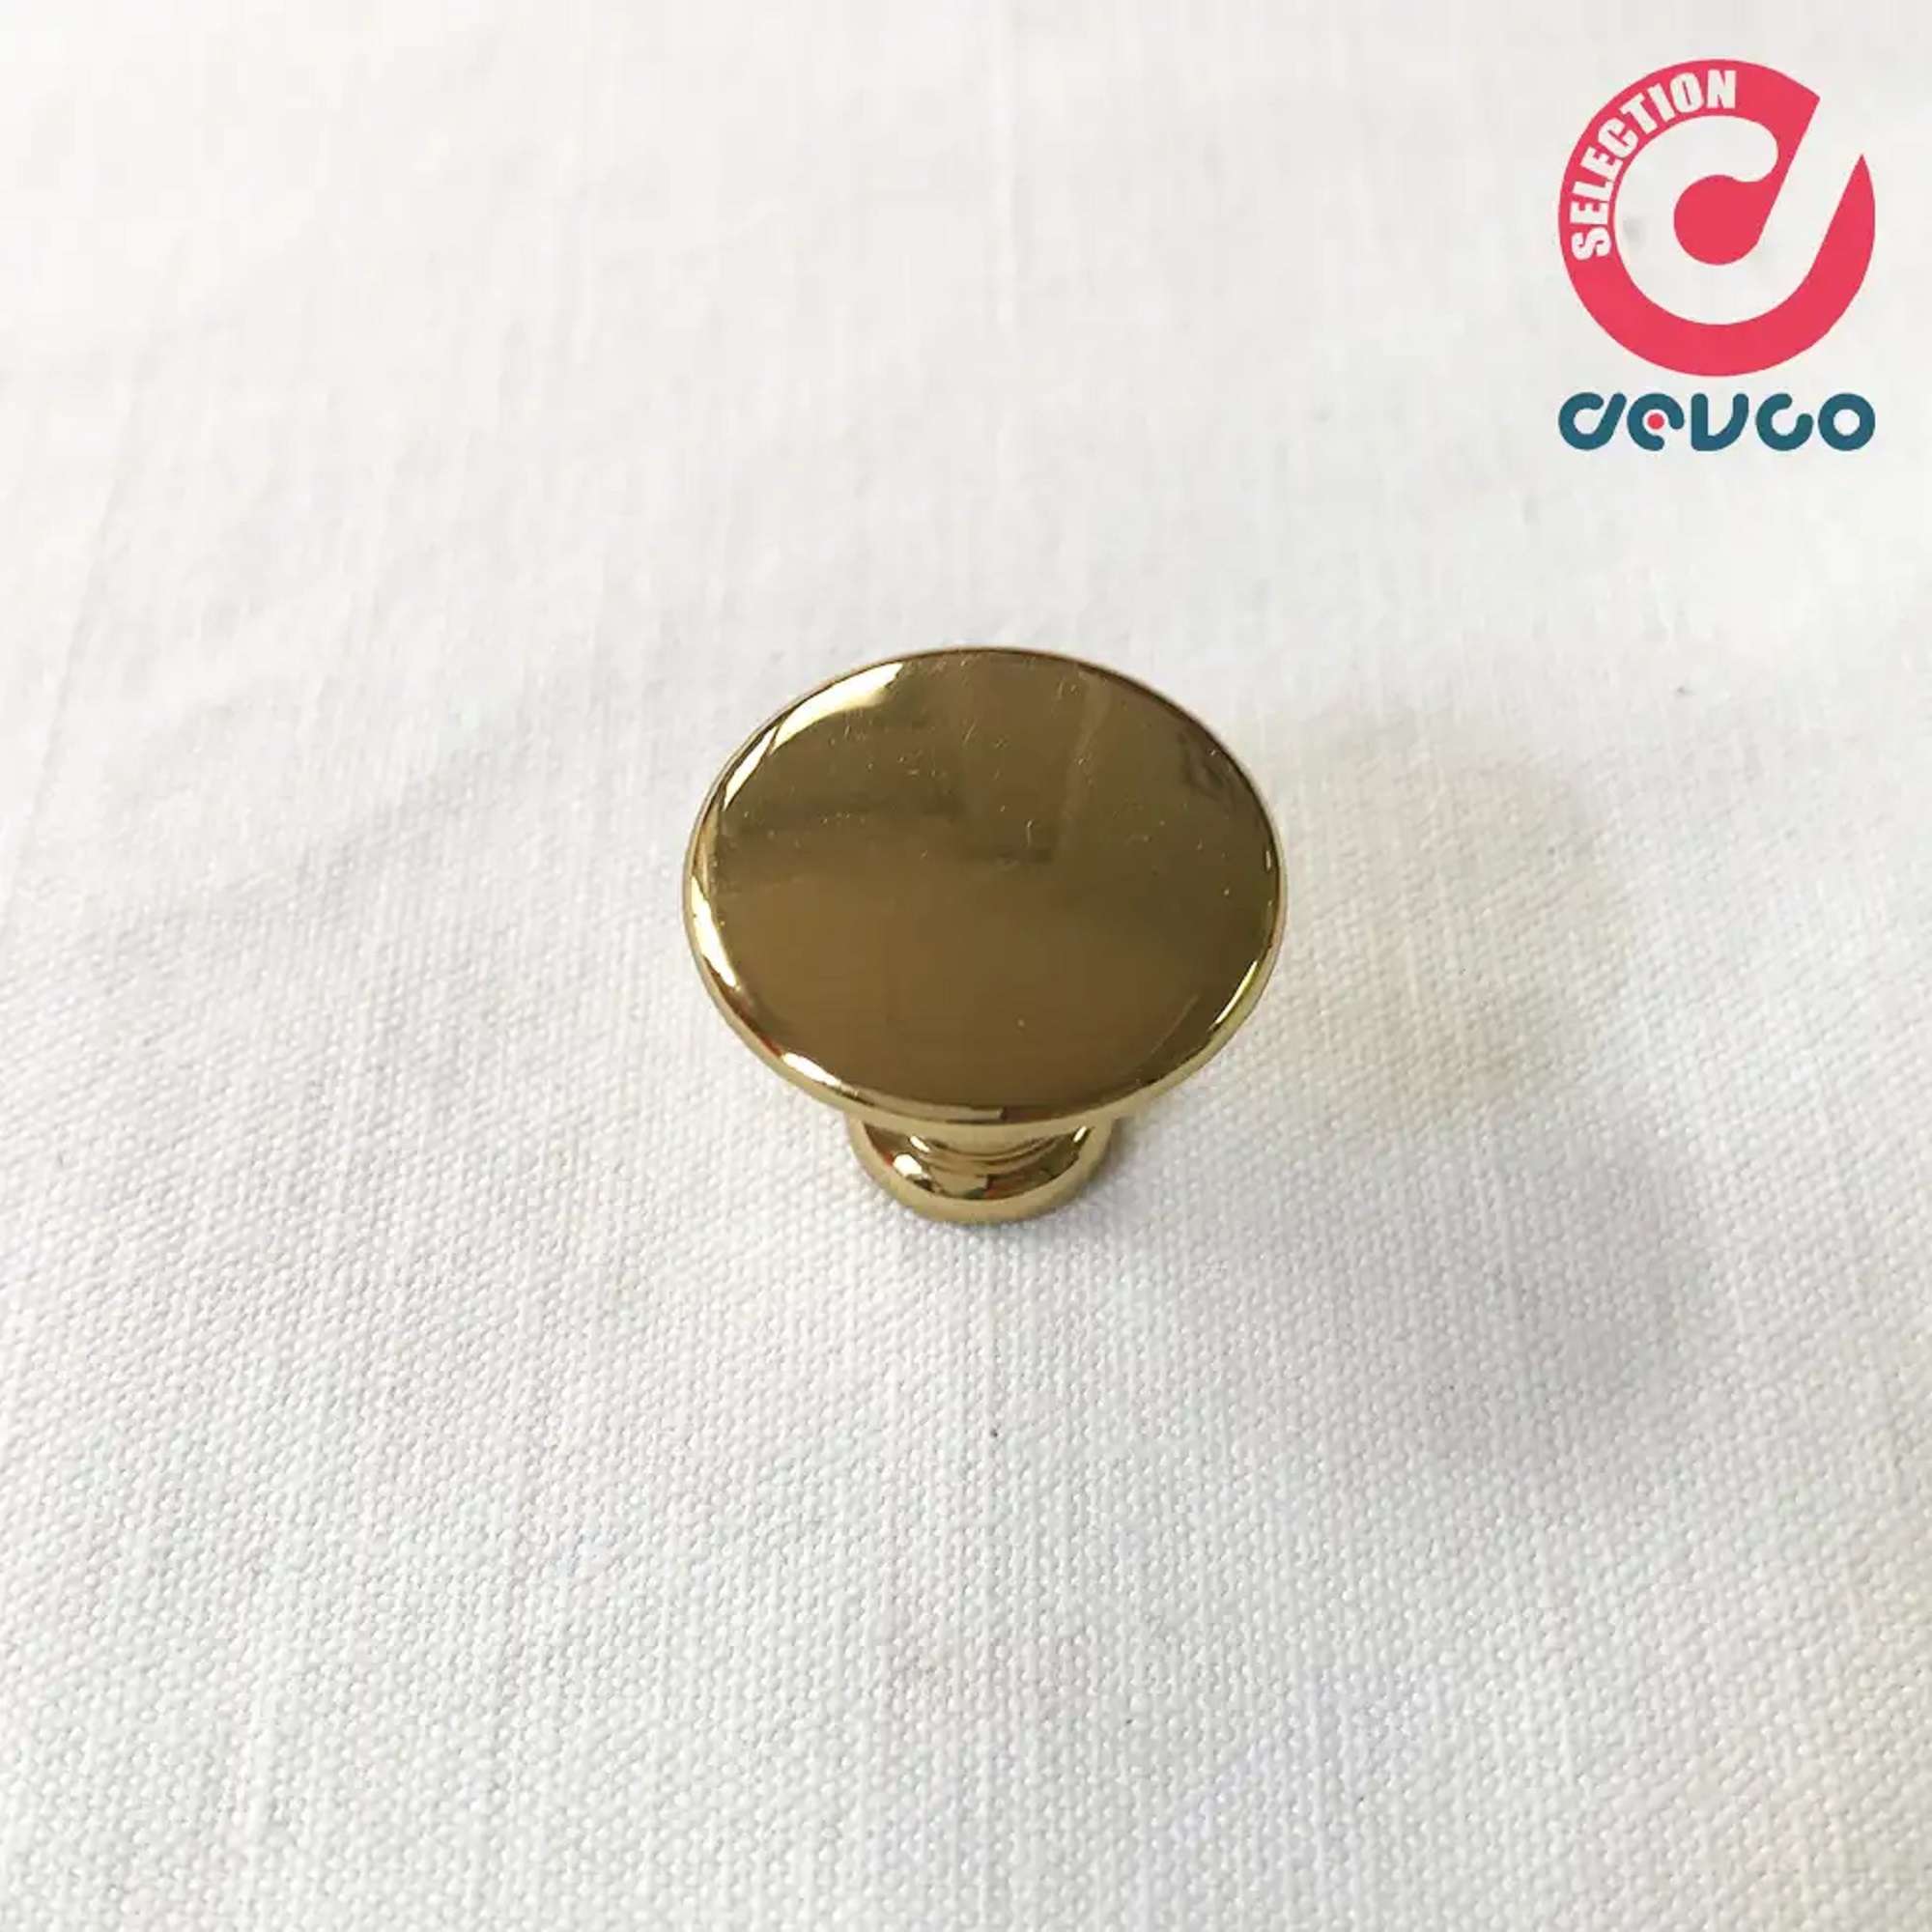 Knob size 20 gold color with pins and nuts  Omp Porro  152  20